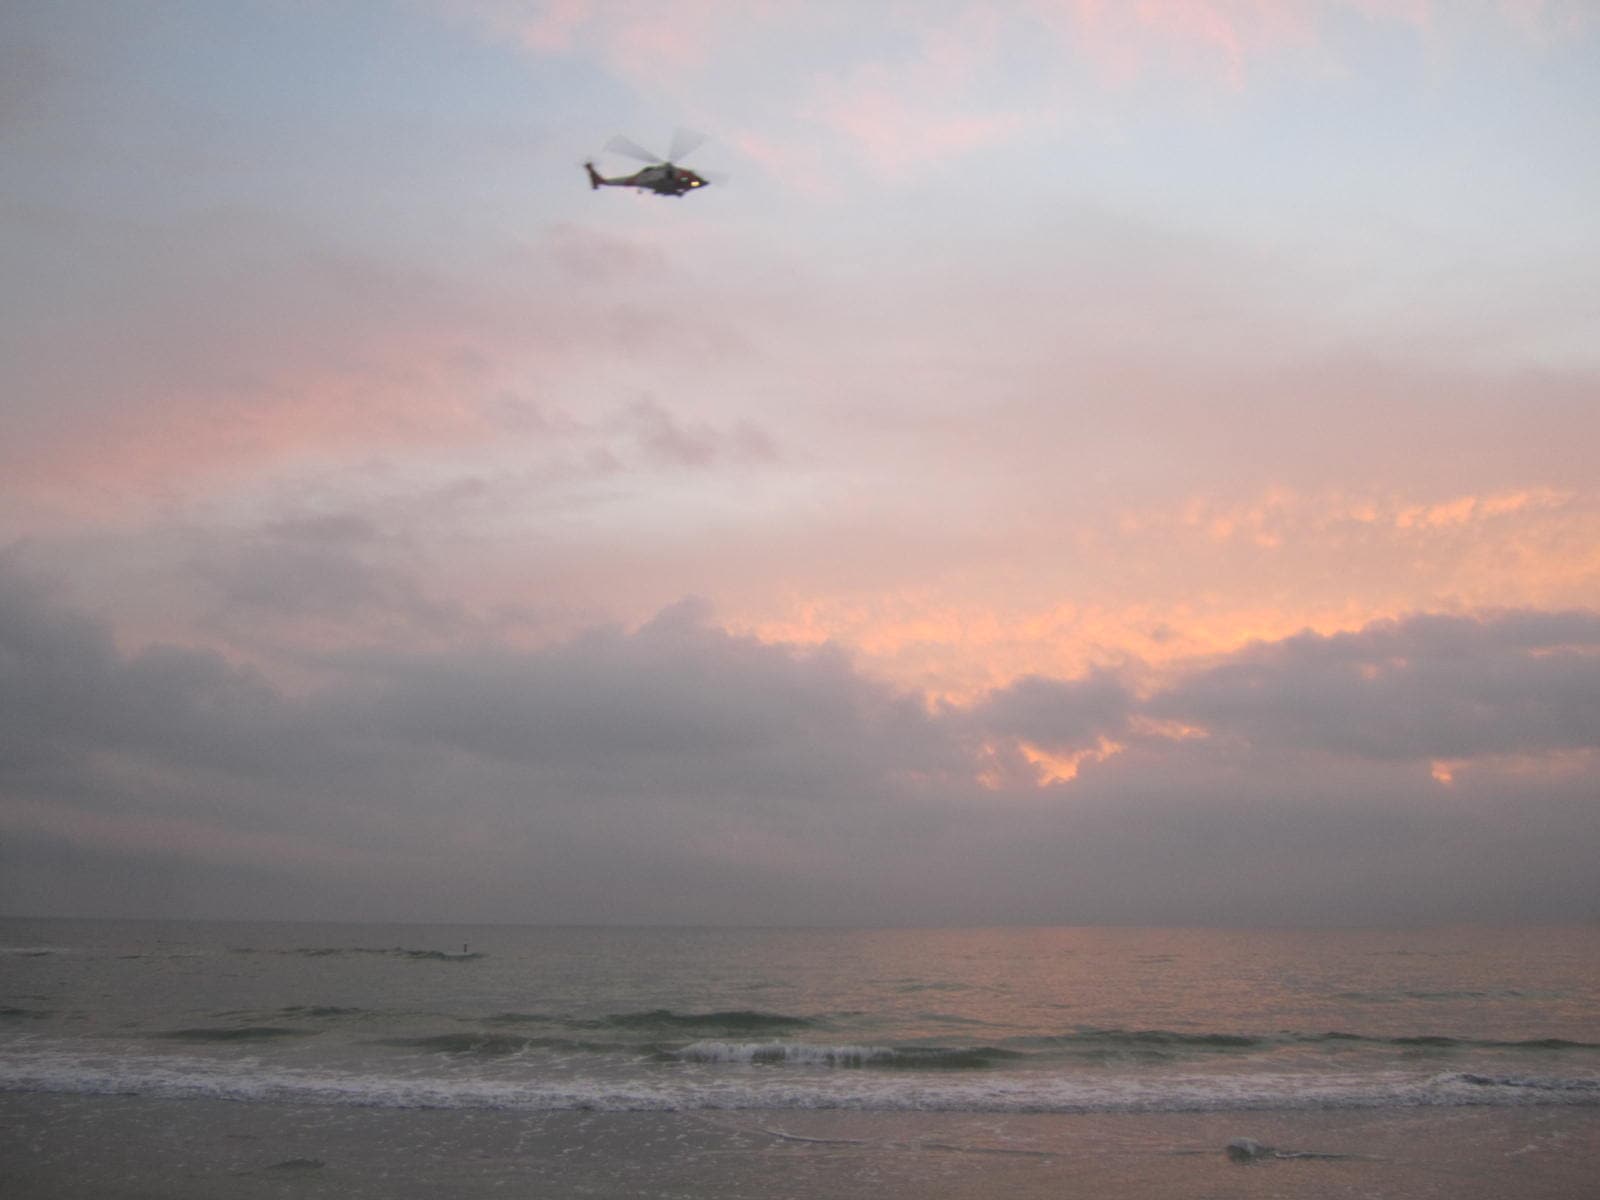 Coast Guard helicopter - St. Petersburg Beach, Florida